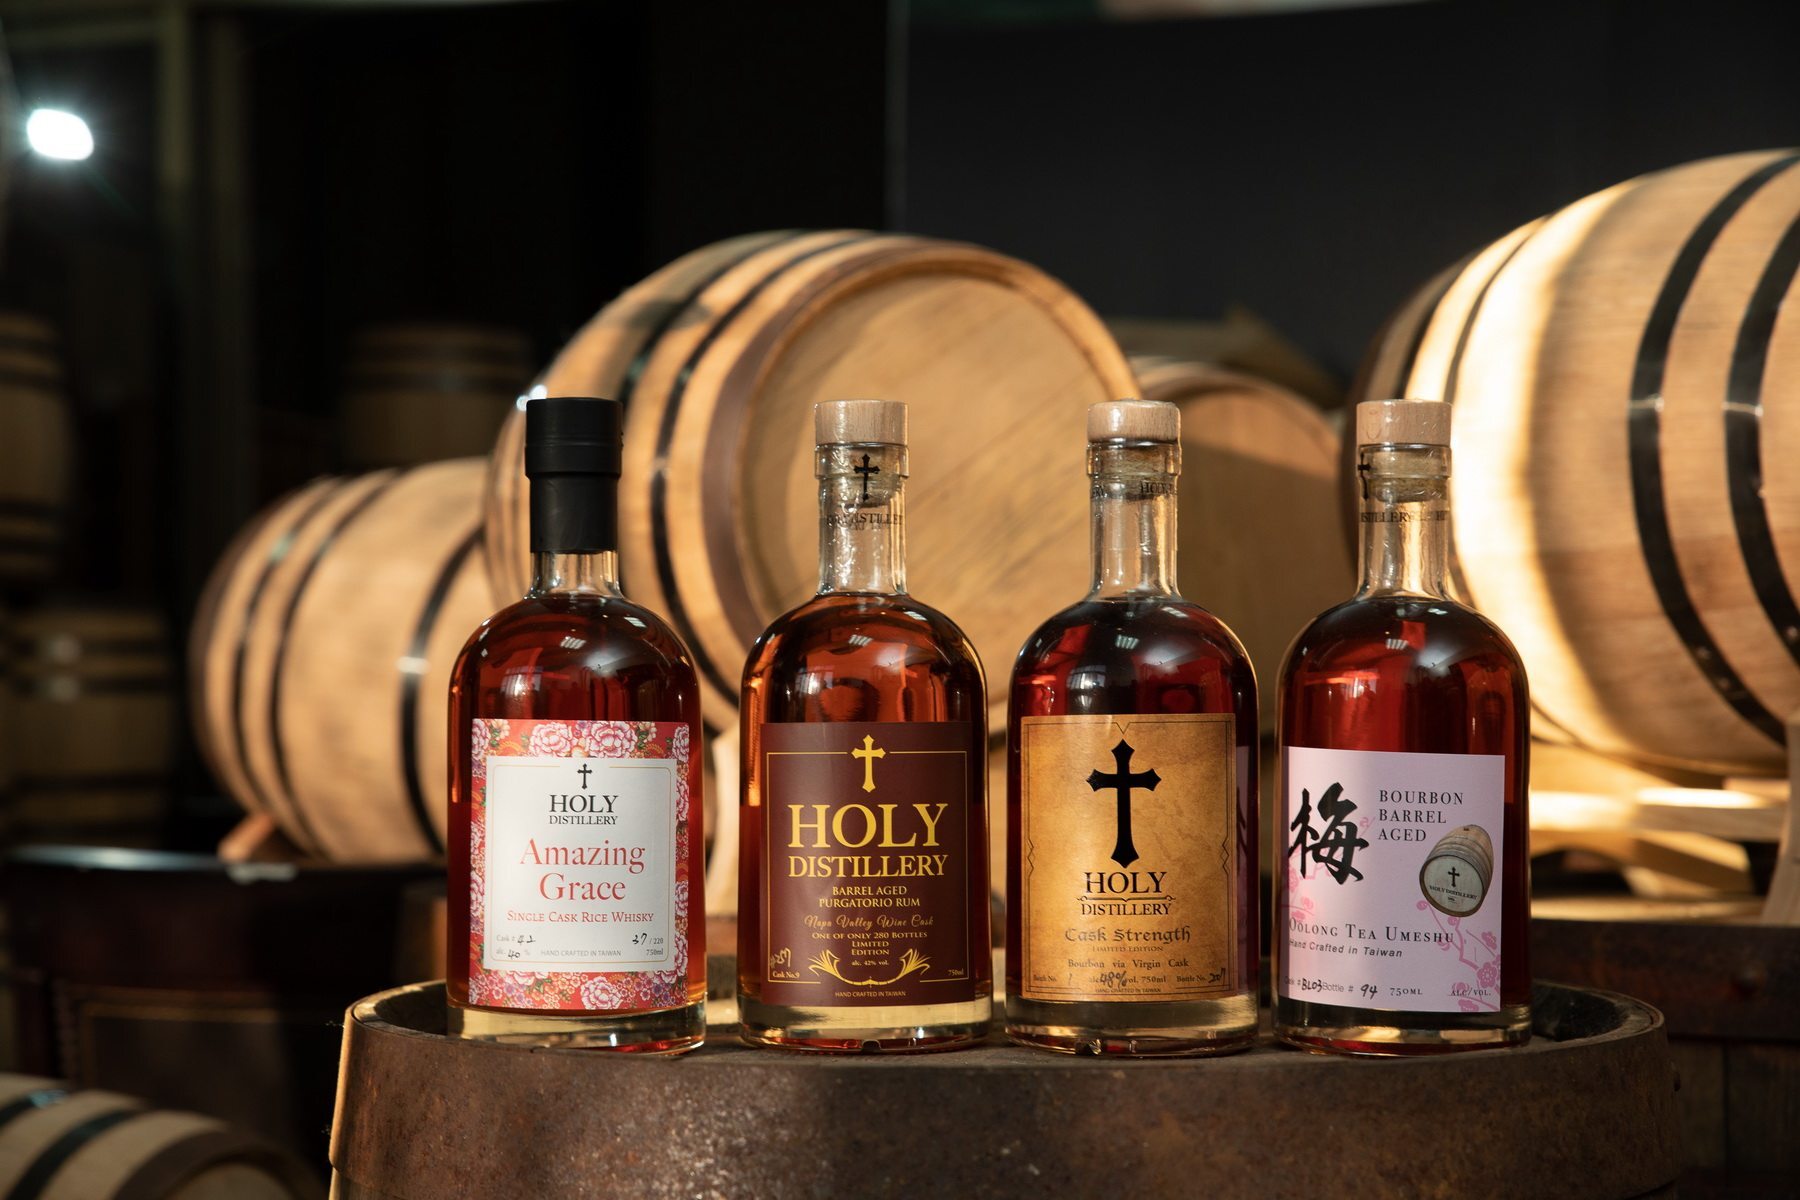 Taiwan’s Holy Distillery takes a biblical inspiration, and aims for the divine. Photo credit: Holy Distillery 